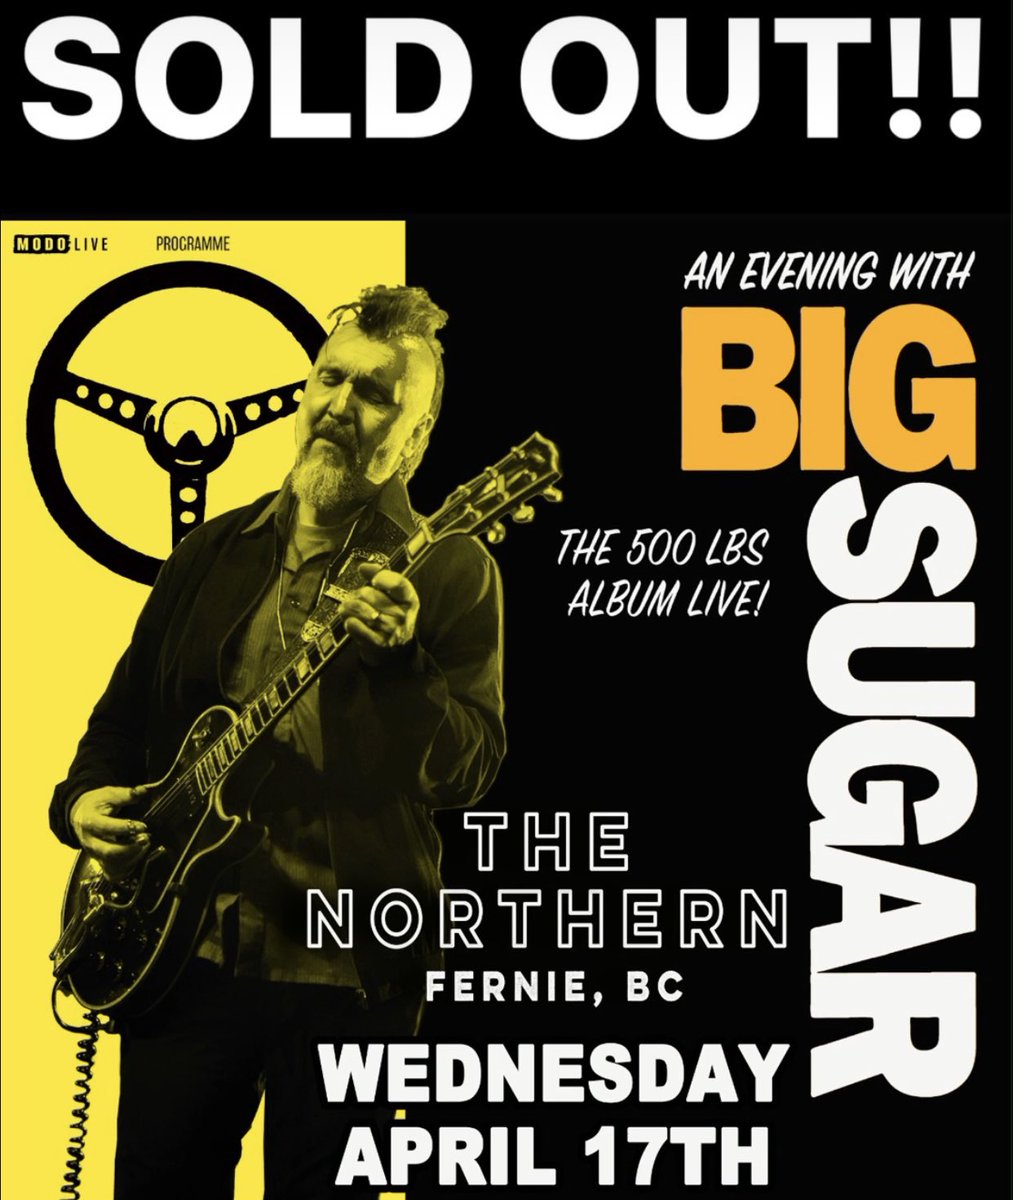 Nice way to start this run! We take the stage at 8pm sharp! #the500lbstour #thenorthernferniebc #bigsugarlive